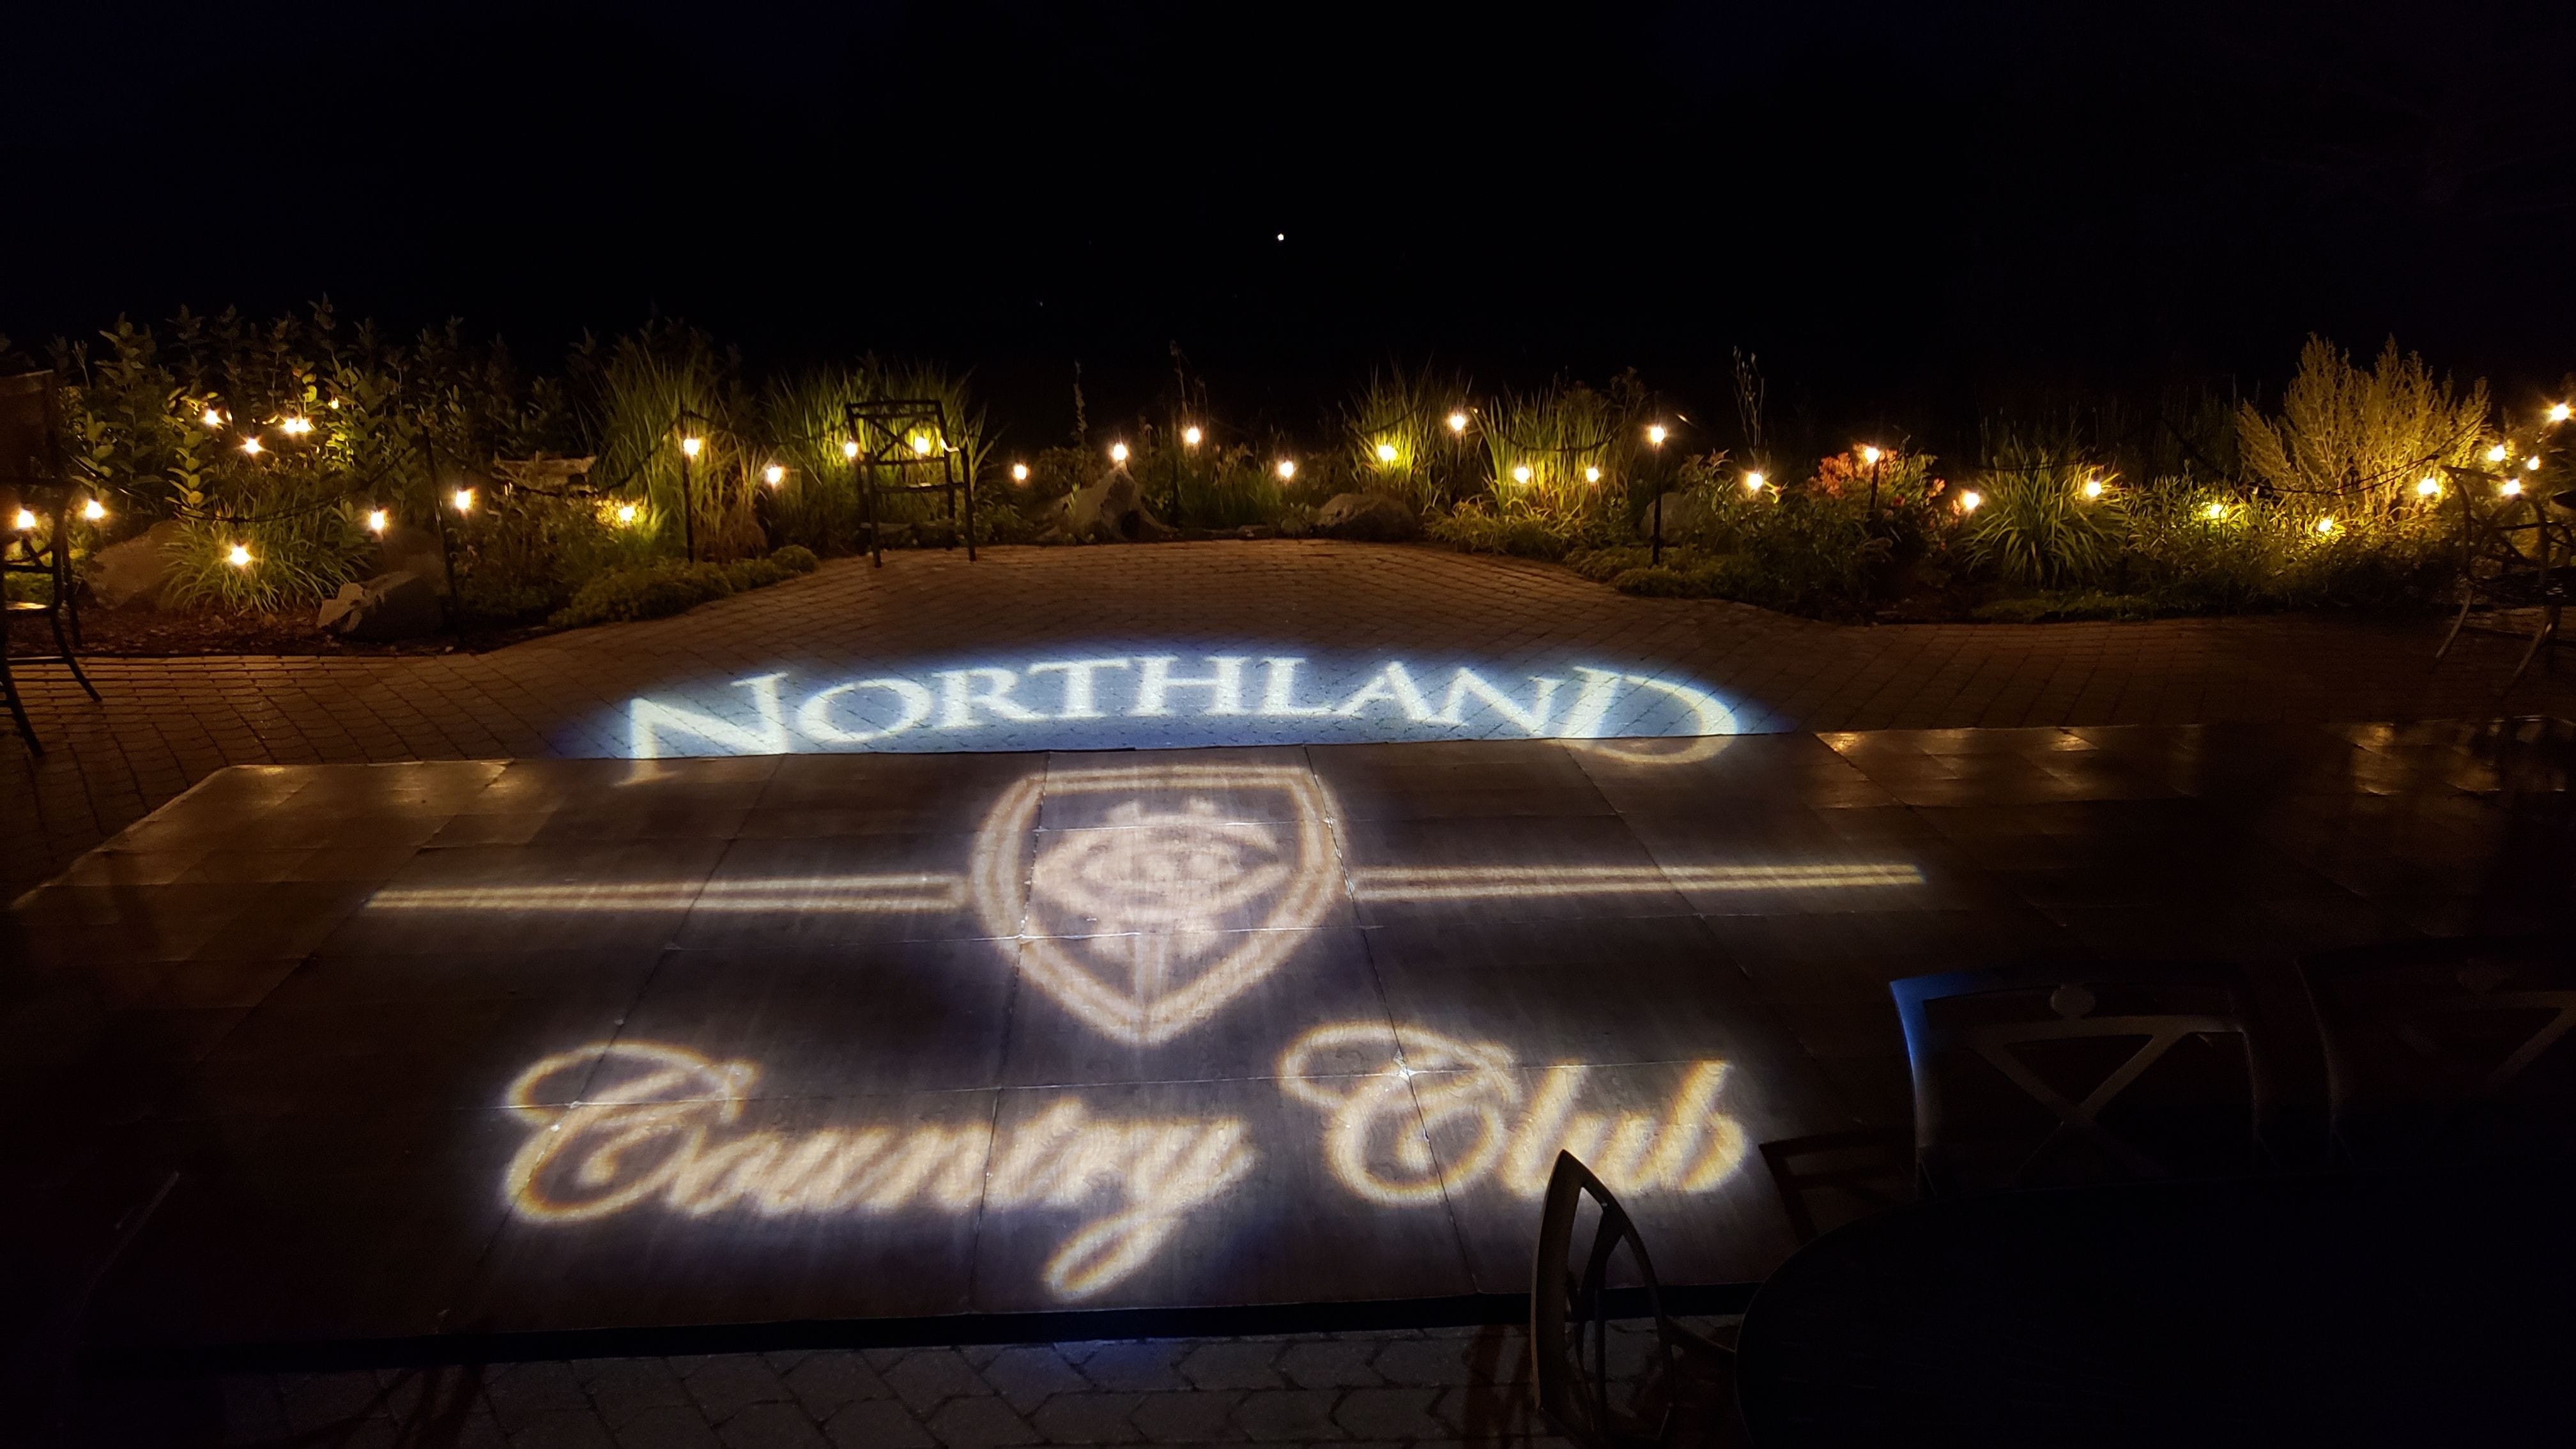 Wedding lighting at the Northland Country Club. Garden bistro and the club logo on the dance floor.